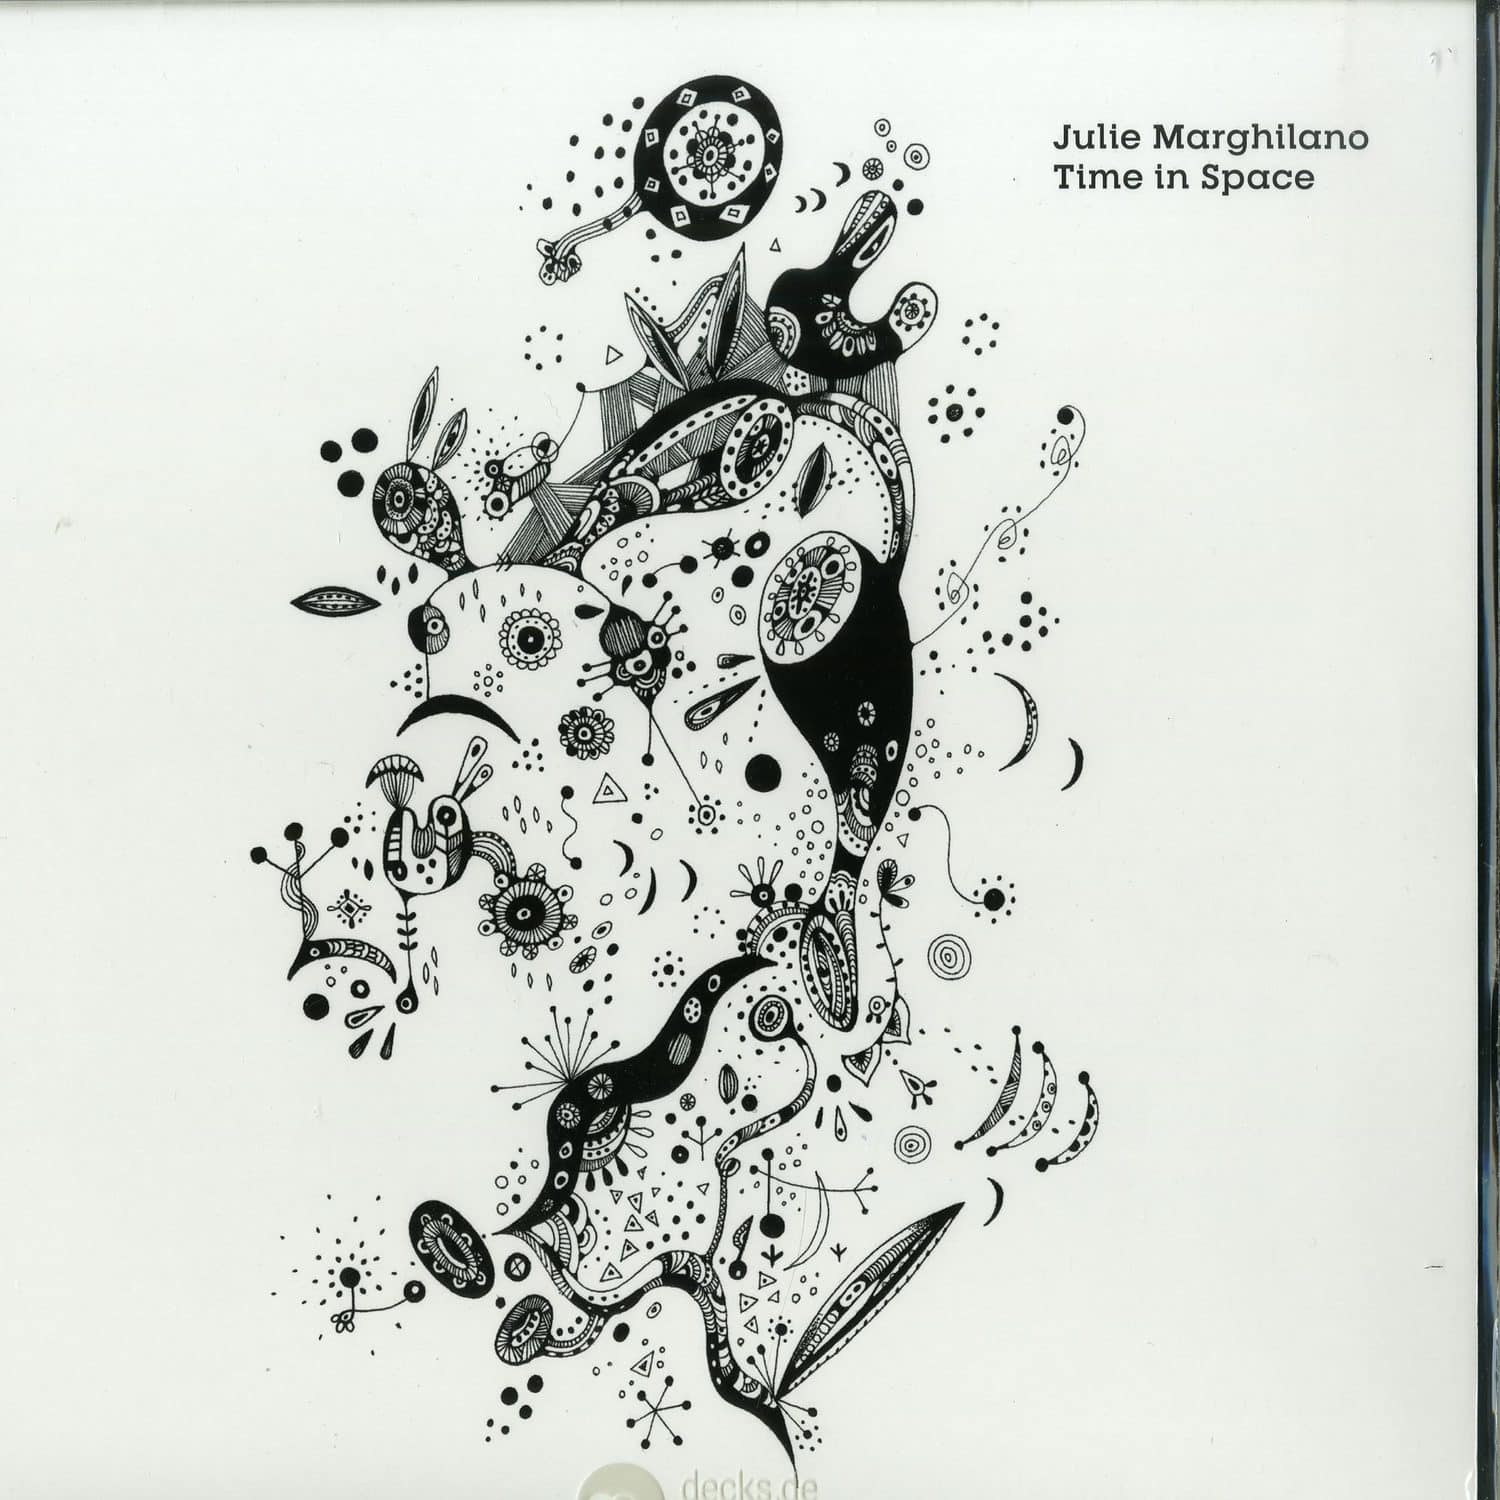 Julie Marghilano - TIME IN SPACE